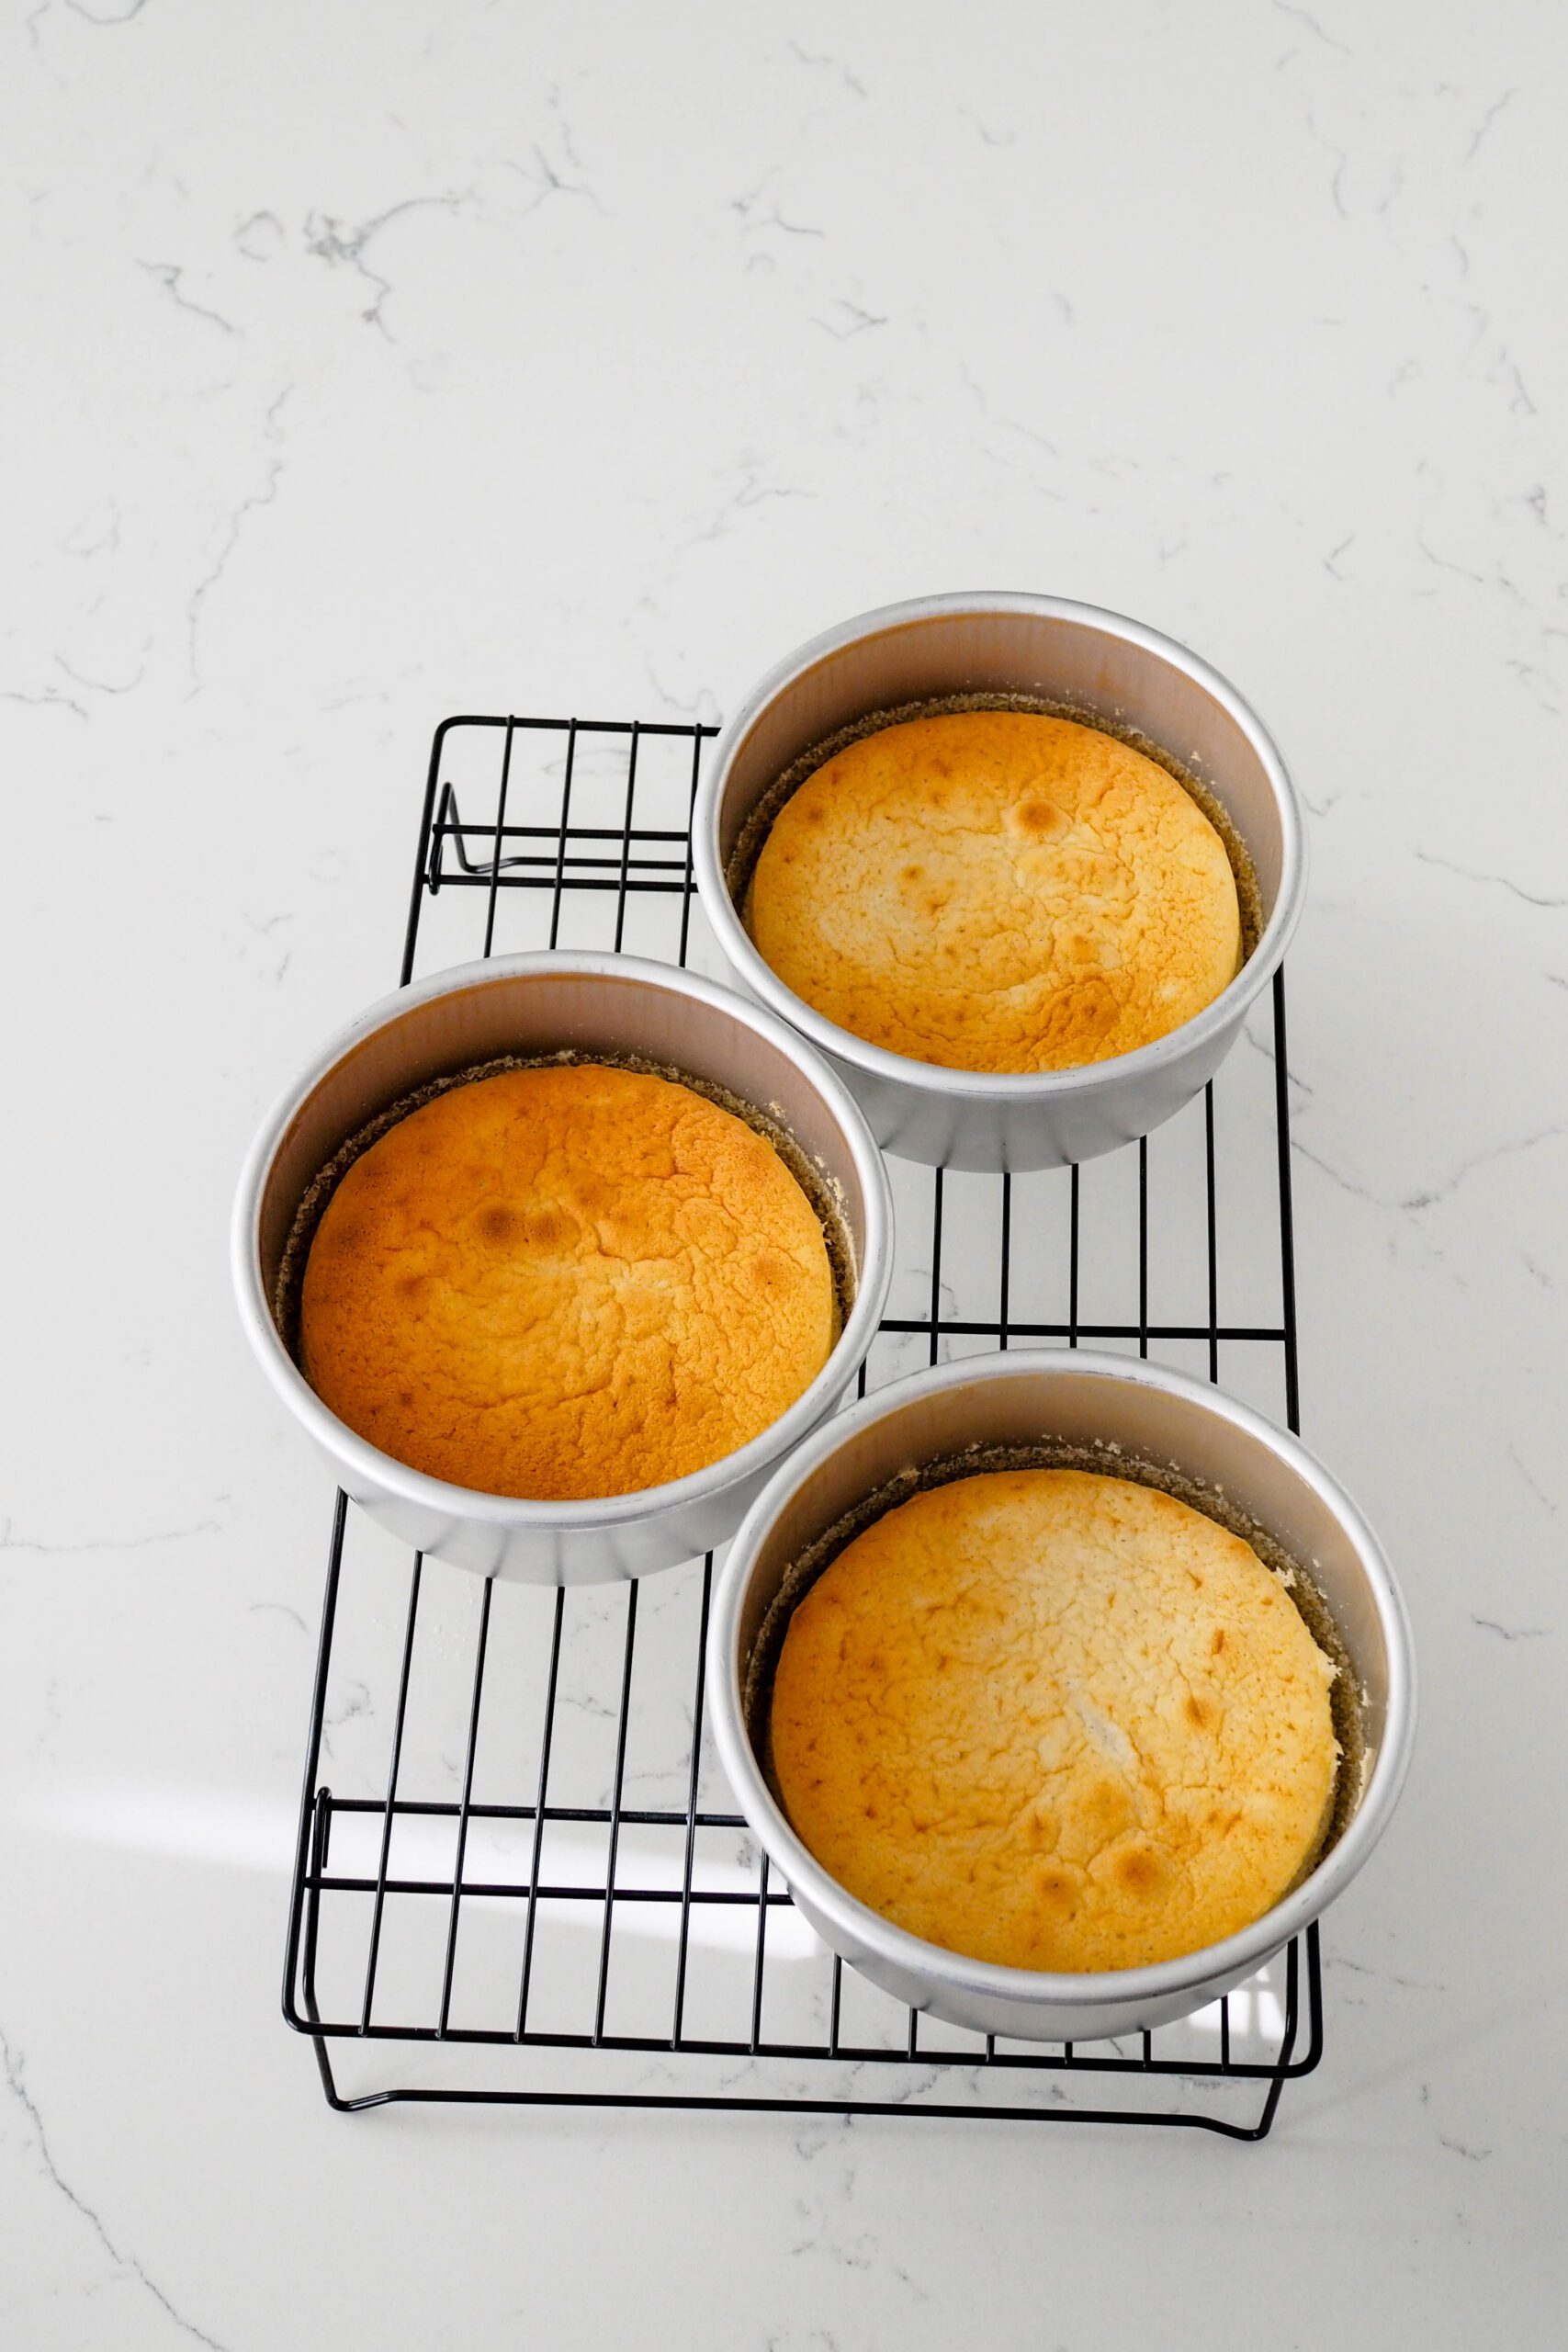 Three baked 6" cakes cool in the pan over a cooling rack.